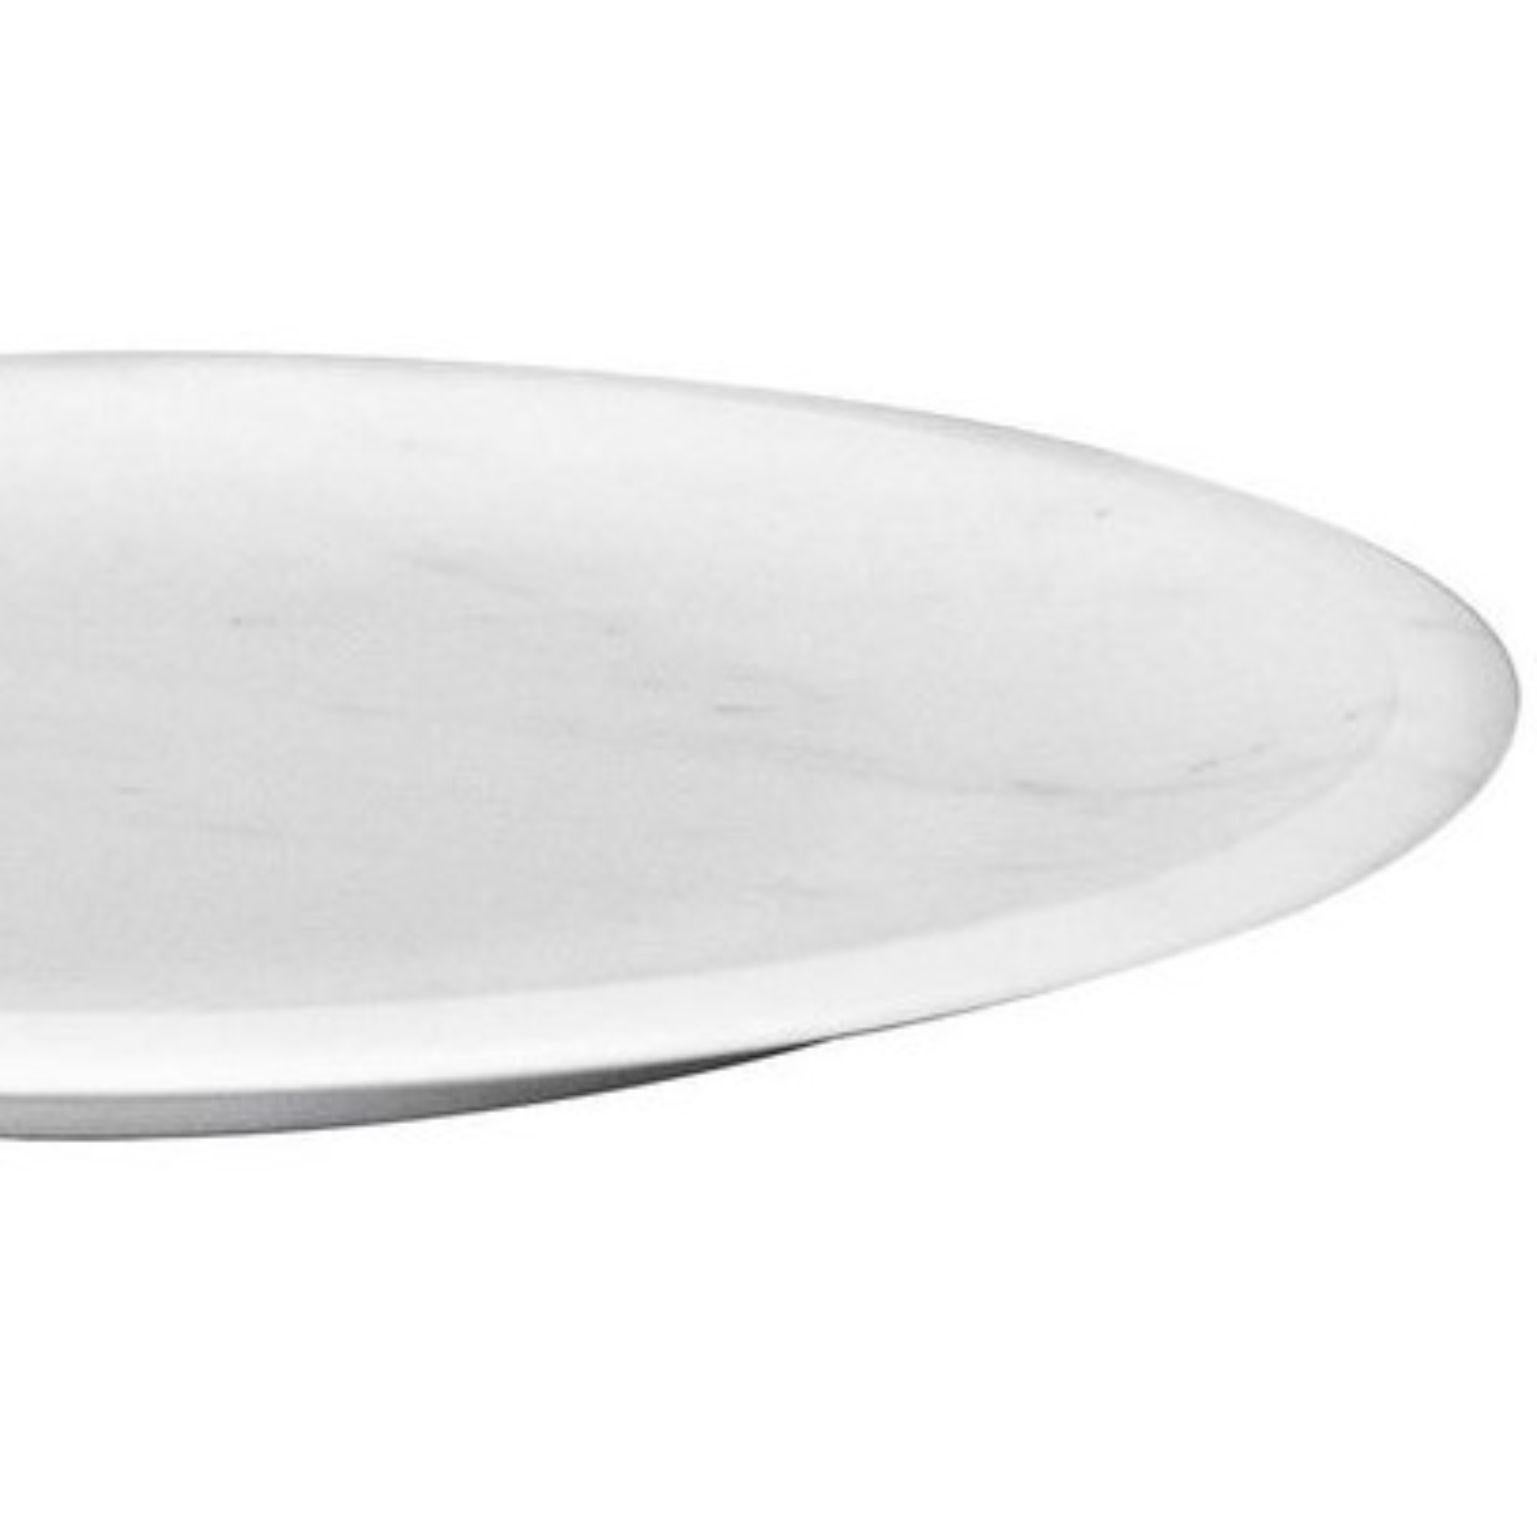 Modern Piatto Piano #1, Dining Plate, White by Ivan Colominas For Sale